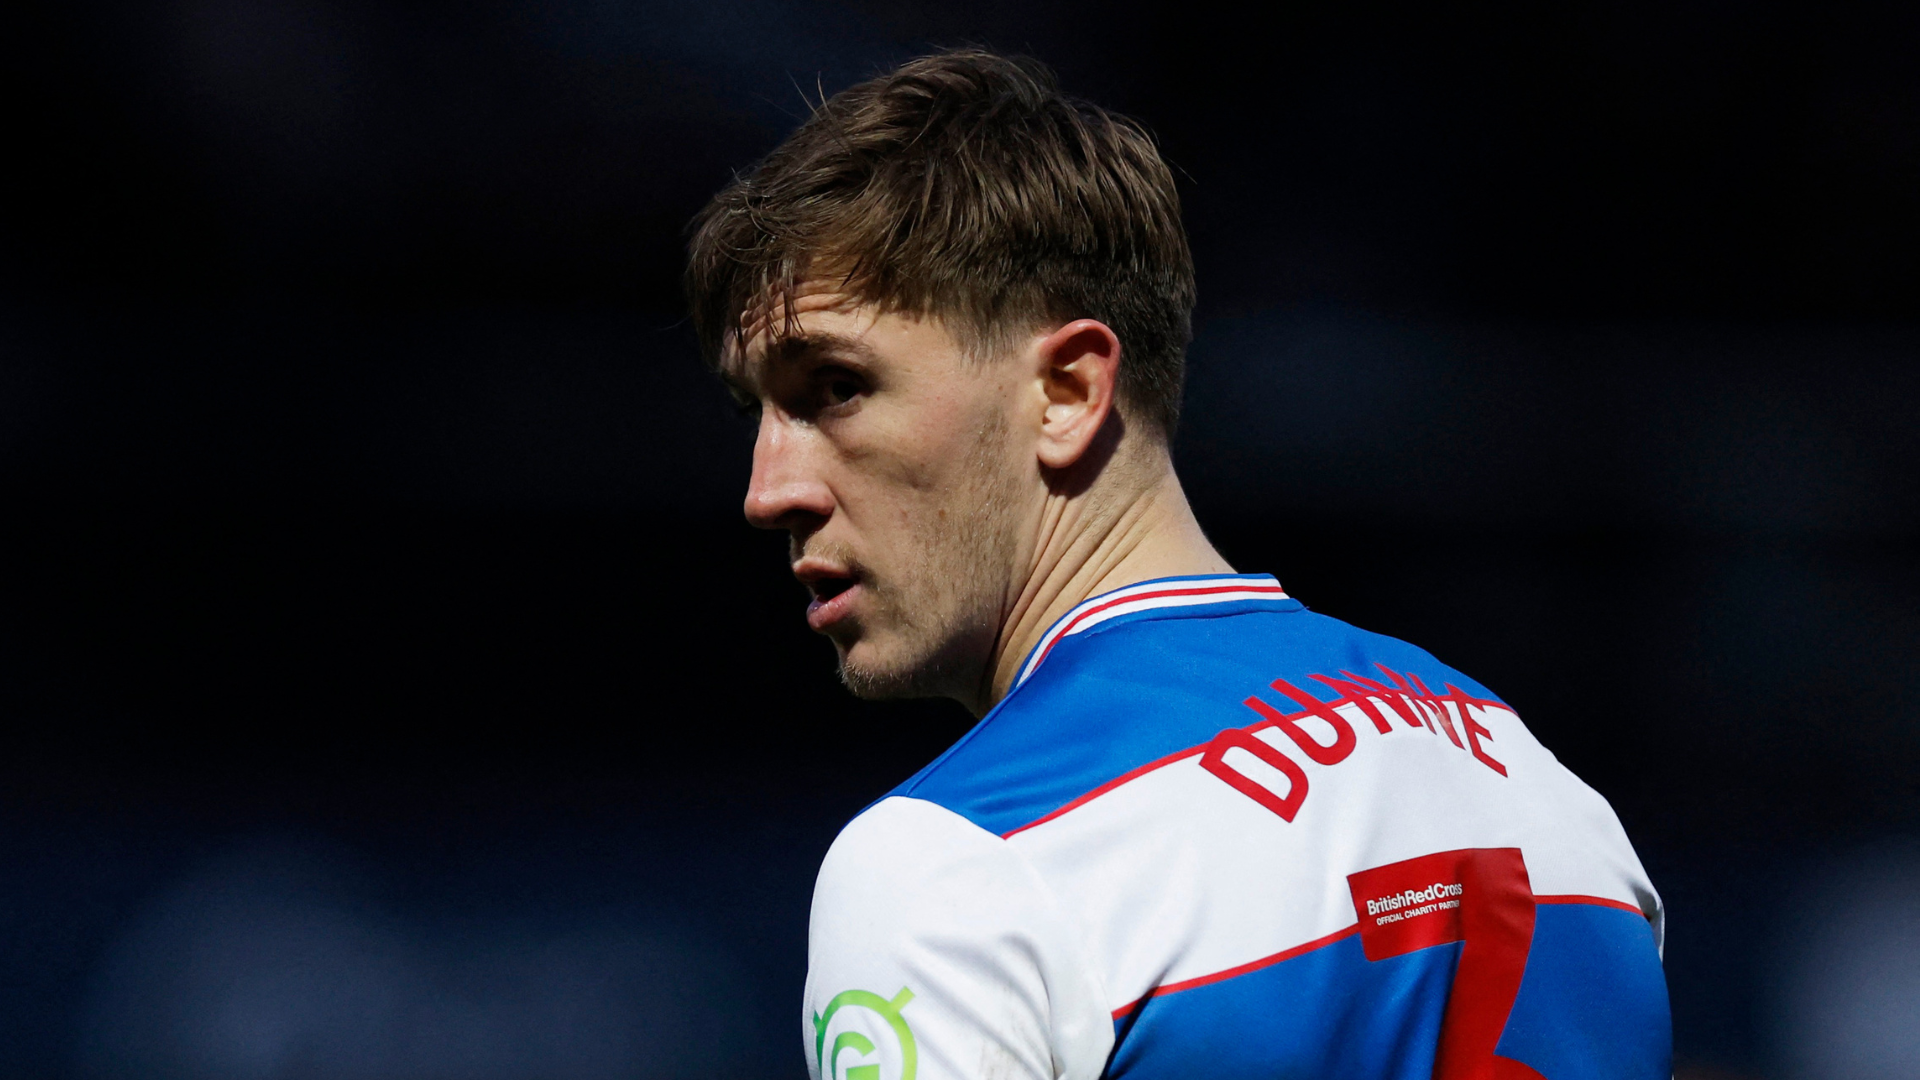 It's harsh to say" - QPR told to avoid Rotherham United, Cameron Humphreys transfer  deal